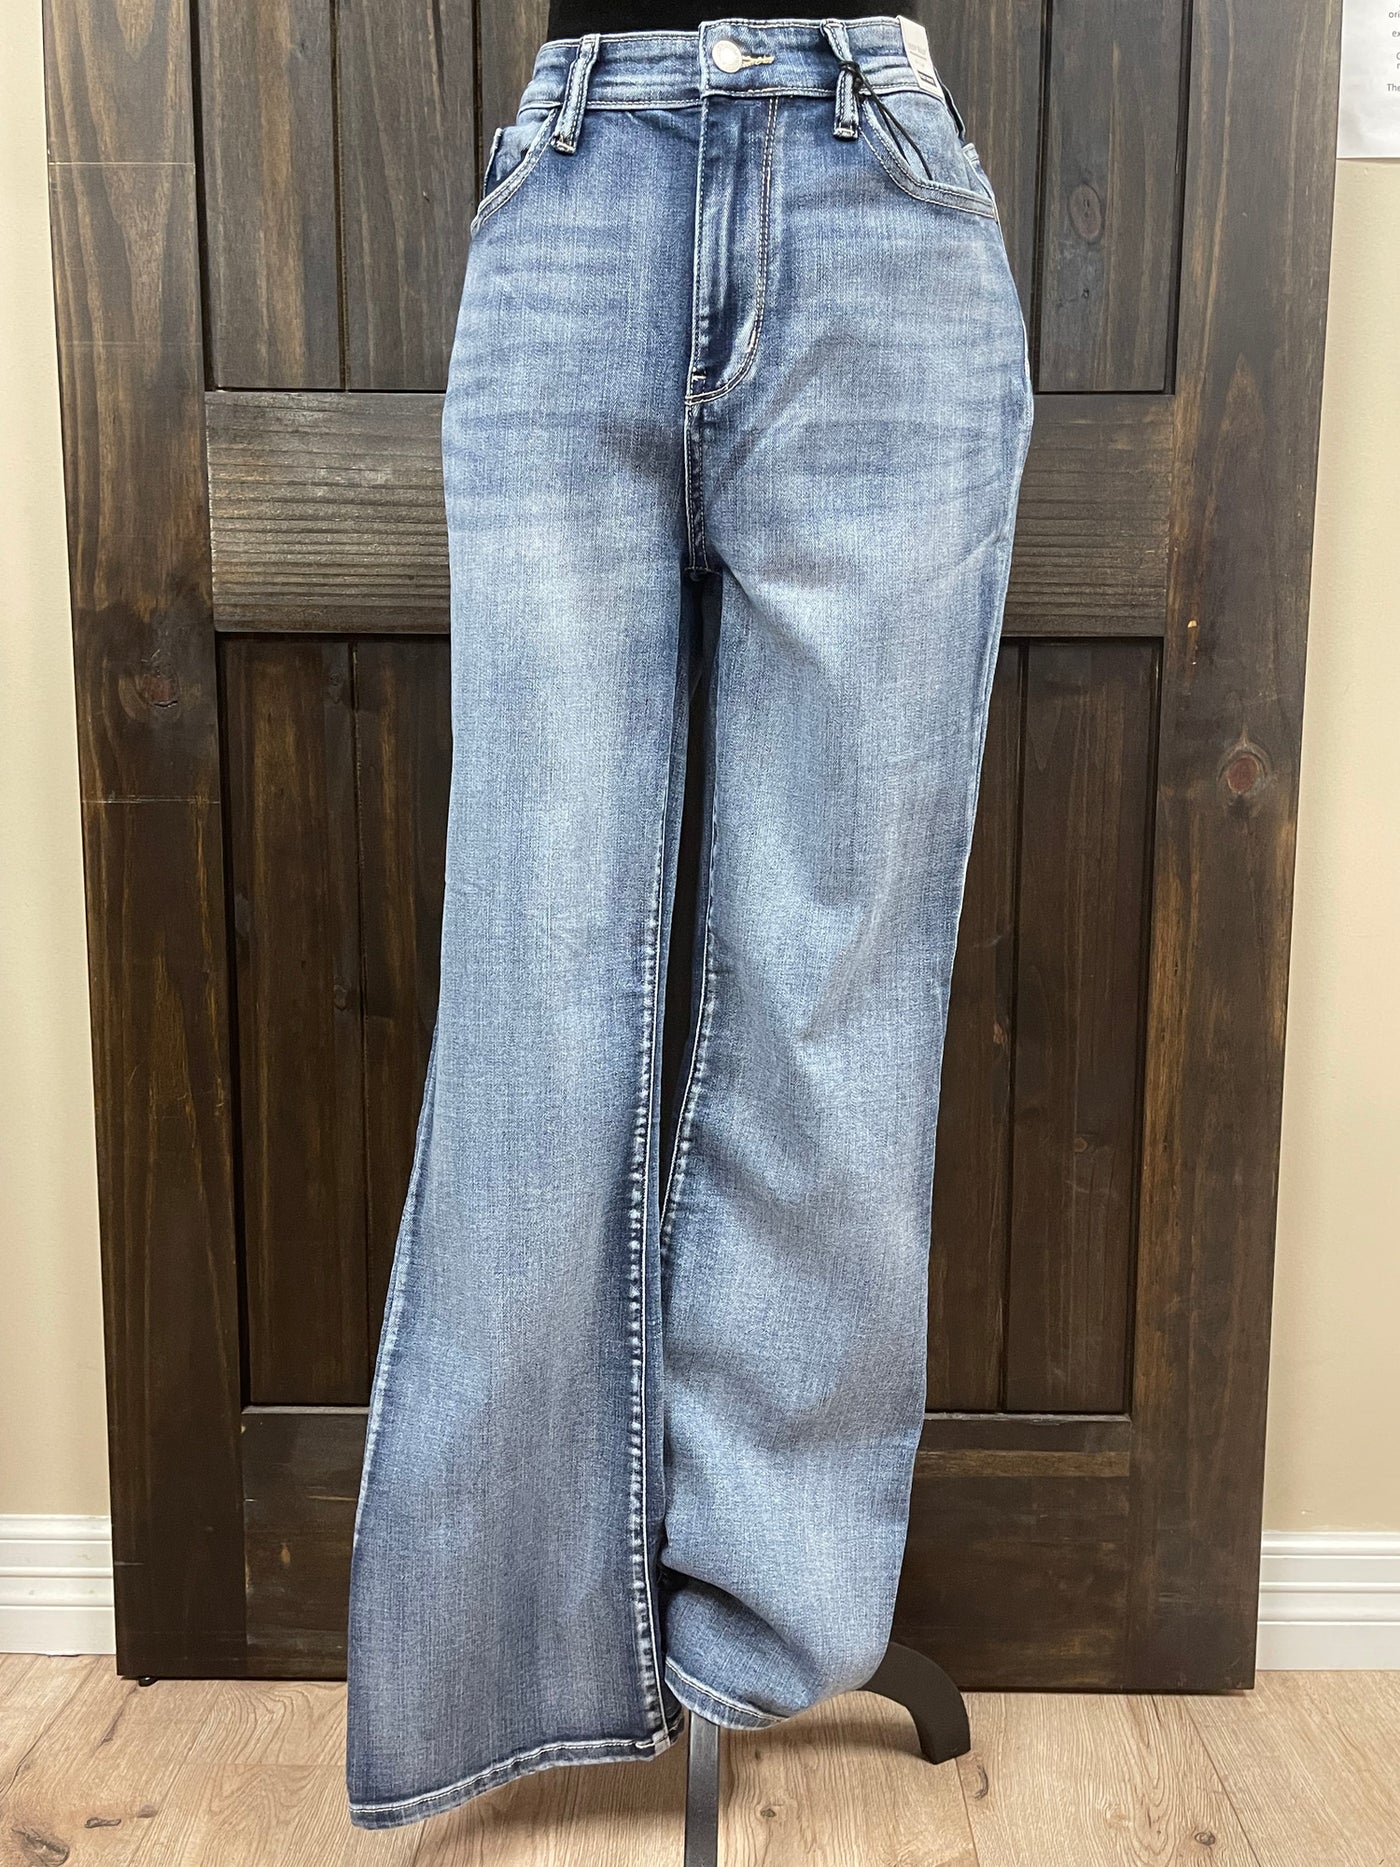 Judy Blue Jeans Women 13/31 Blue Relaxed Mid Rise Medium Wash